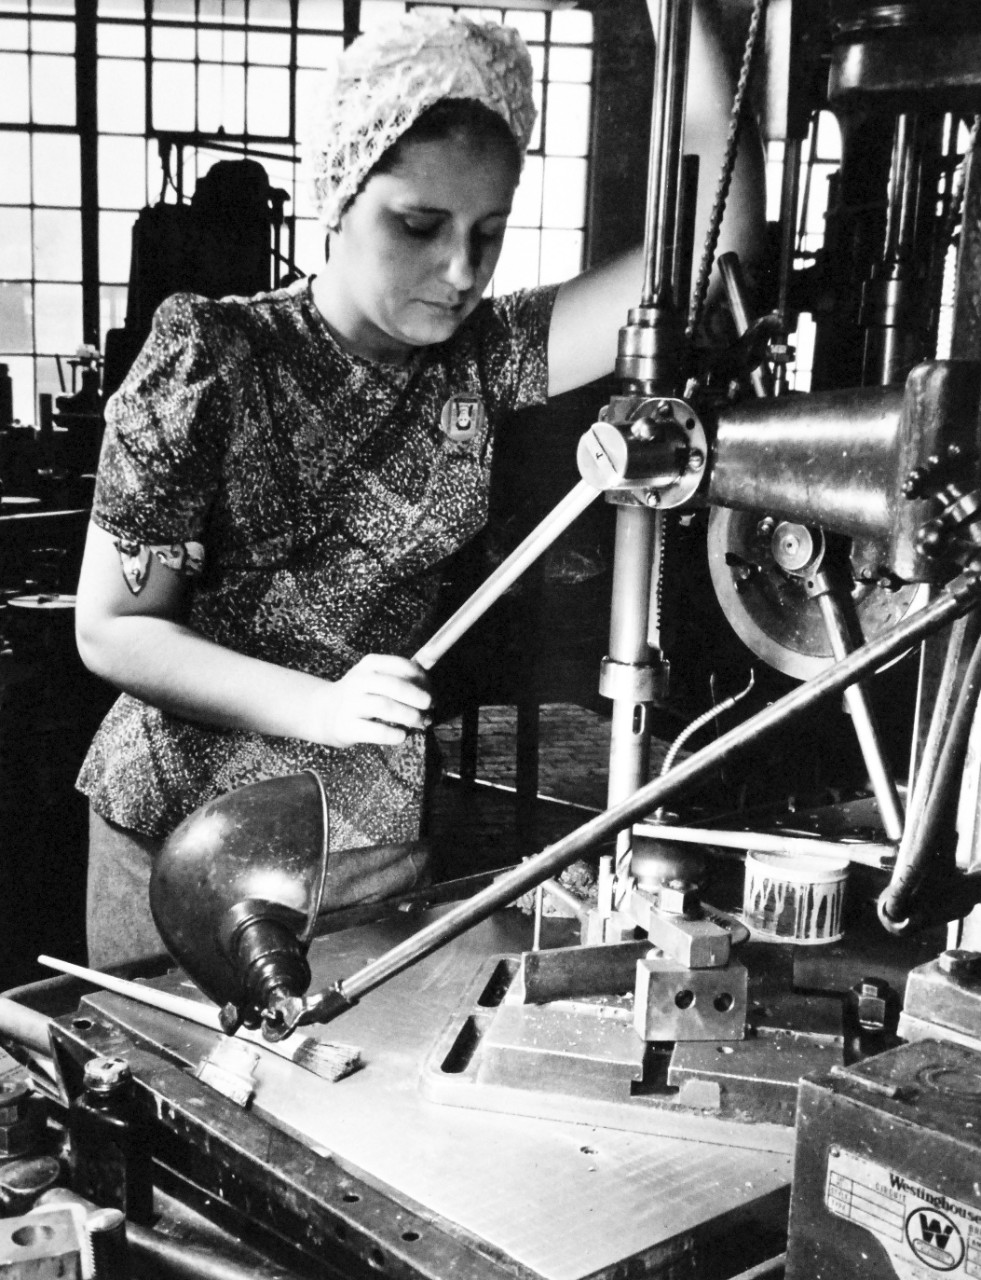 U.S. Naval Gun Factory, Washington Navy Yard, 1943.  Shown:  Woman ordnance worker performing first operation in the production of a gun detail on a multiple spindle drill press.  Photograph released March 20, 1943.   Official U.S. Navy photograph, now in the collections of the National Archives.